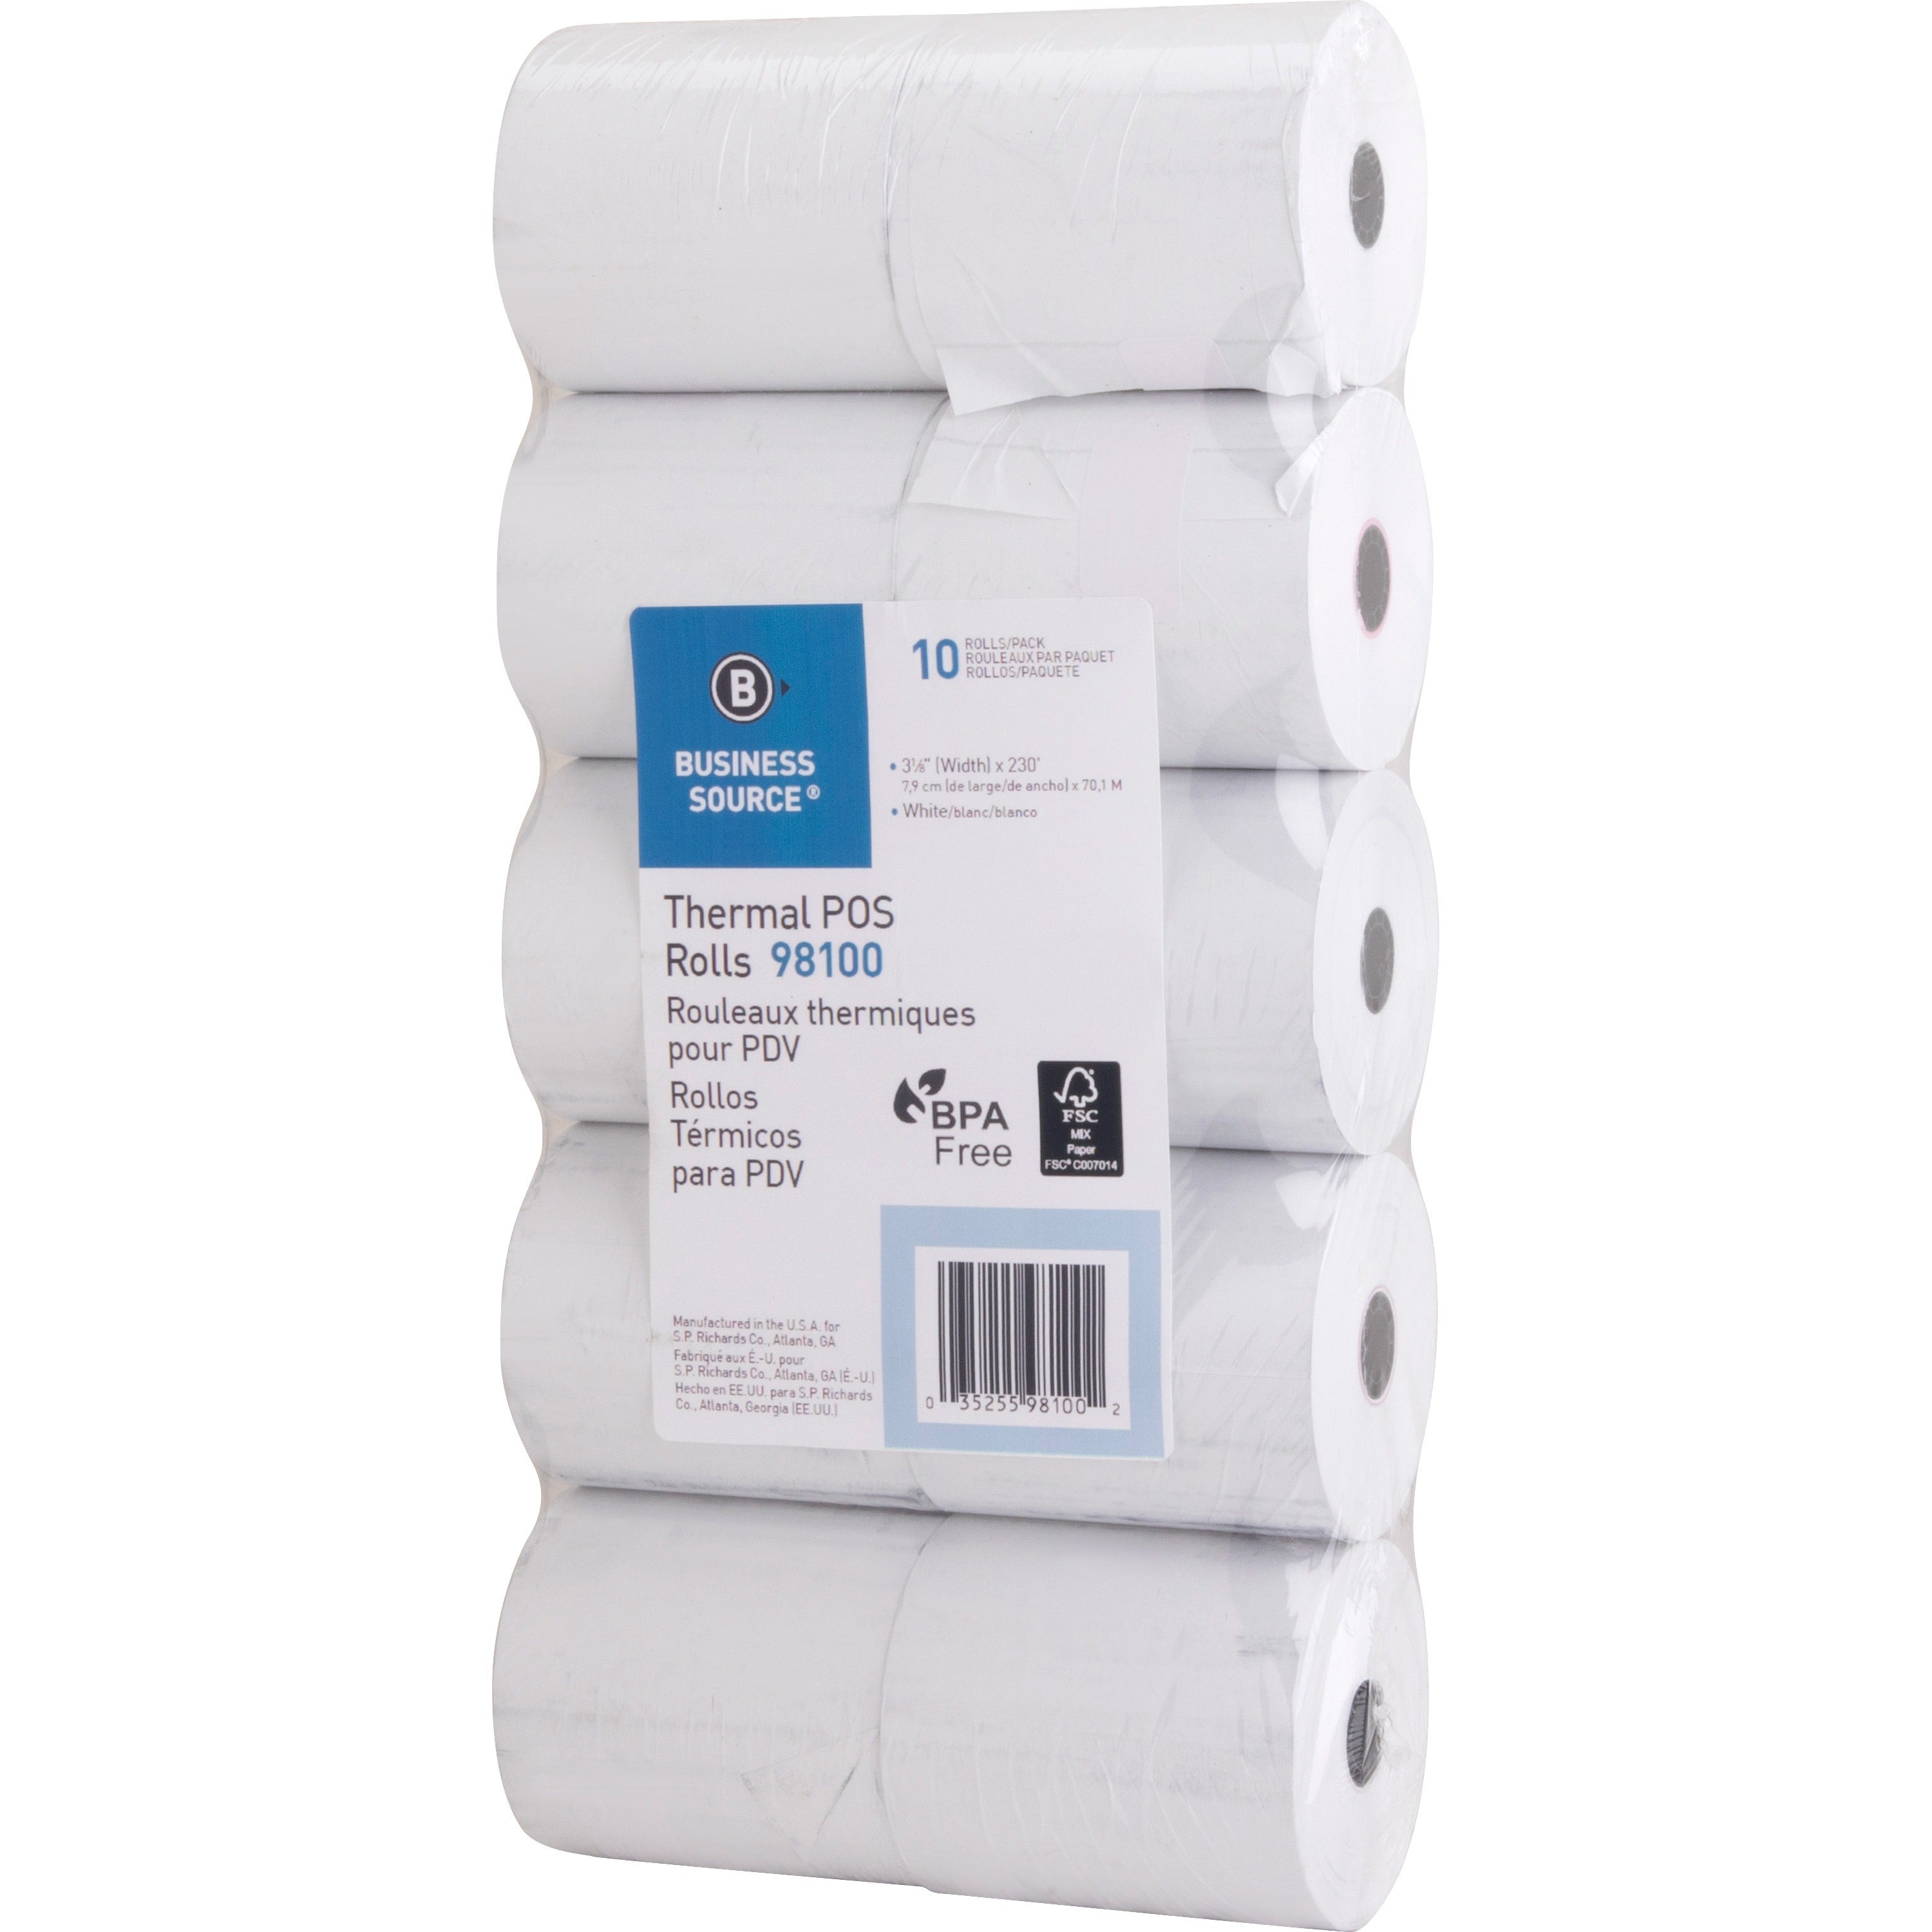 business-source-3-1-8x230-pos-receipt-thermal-rolls-3-1-8-x-230-ft-10-pack-white_bsn98100 - 2